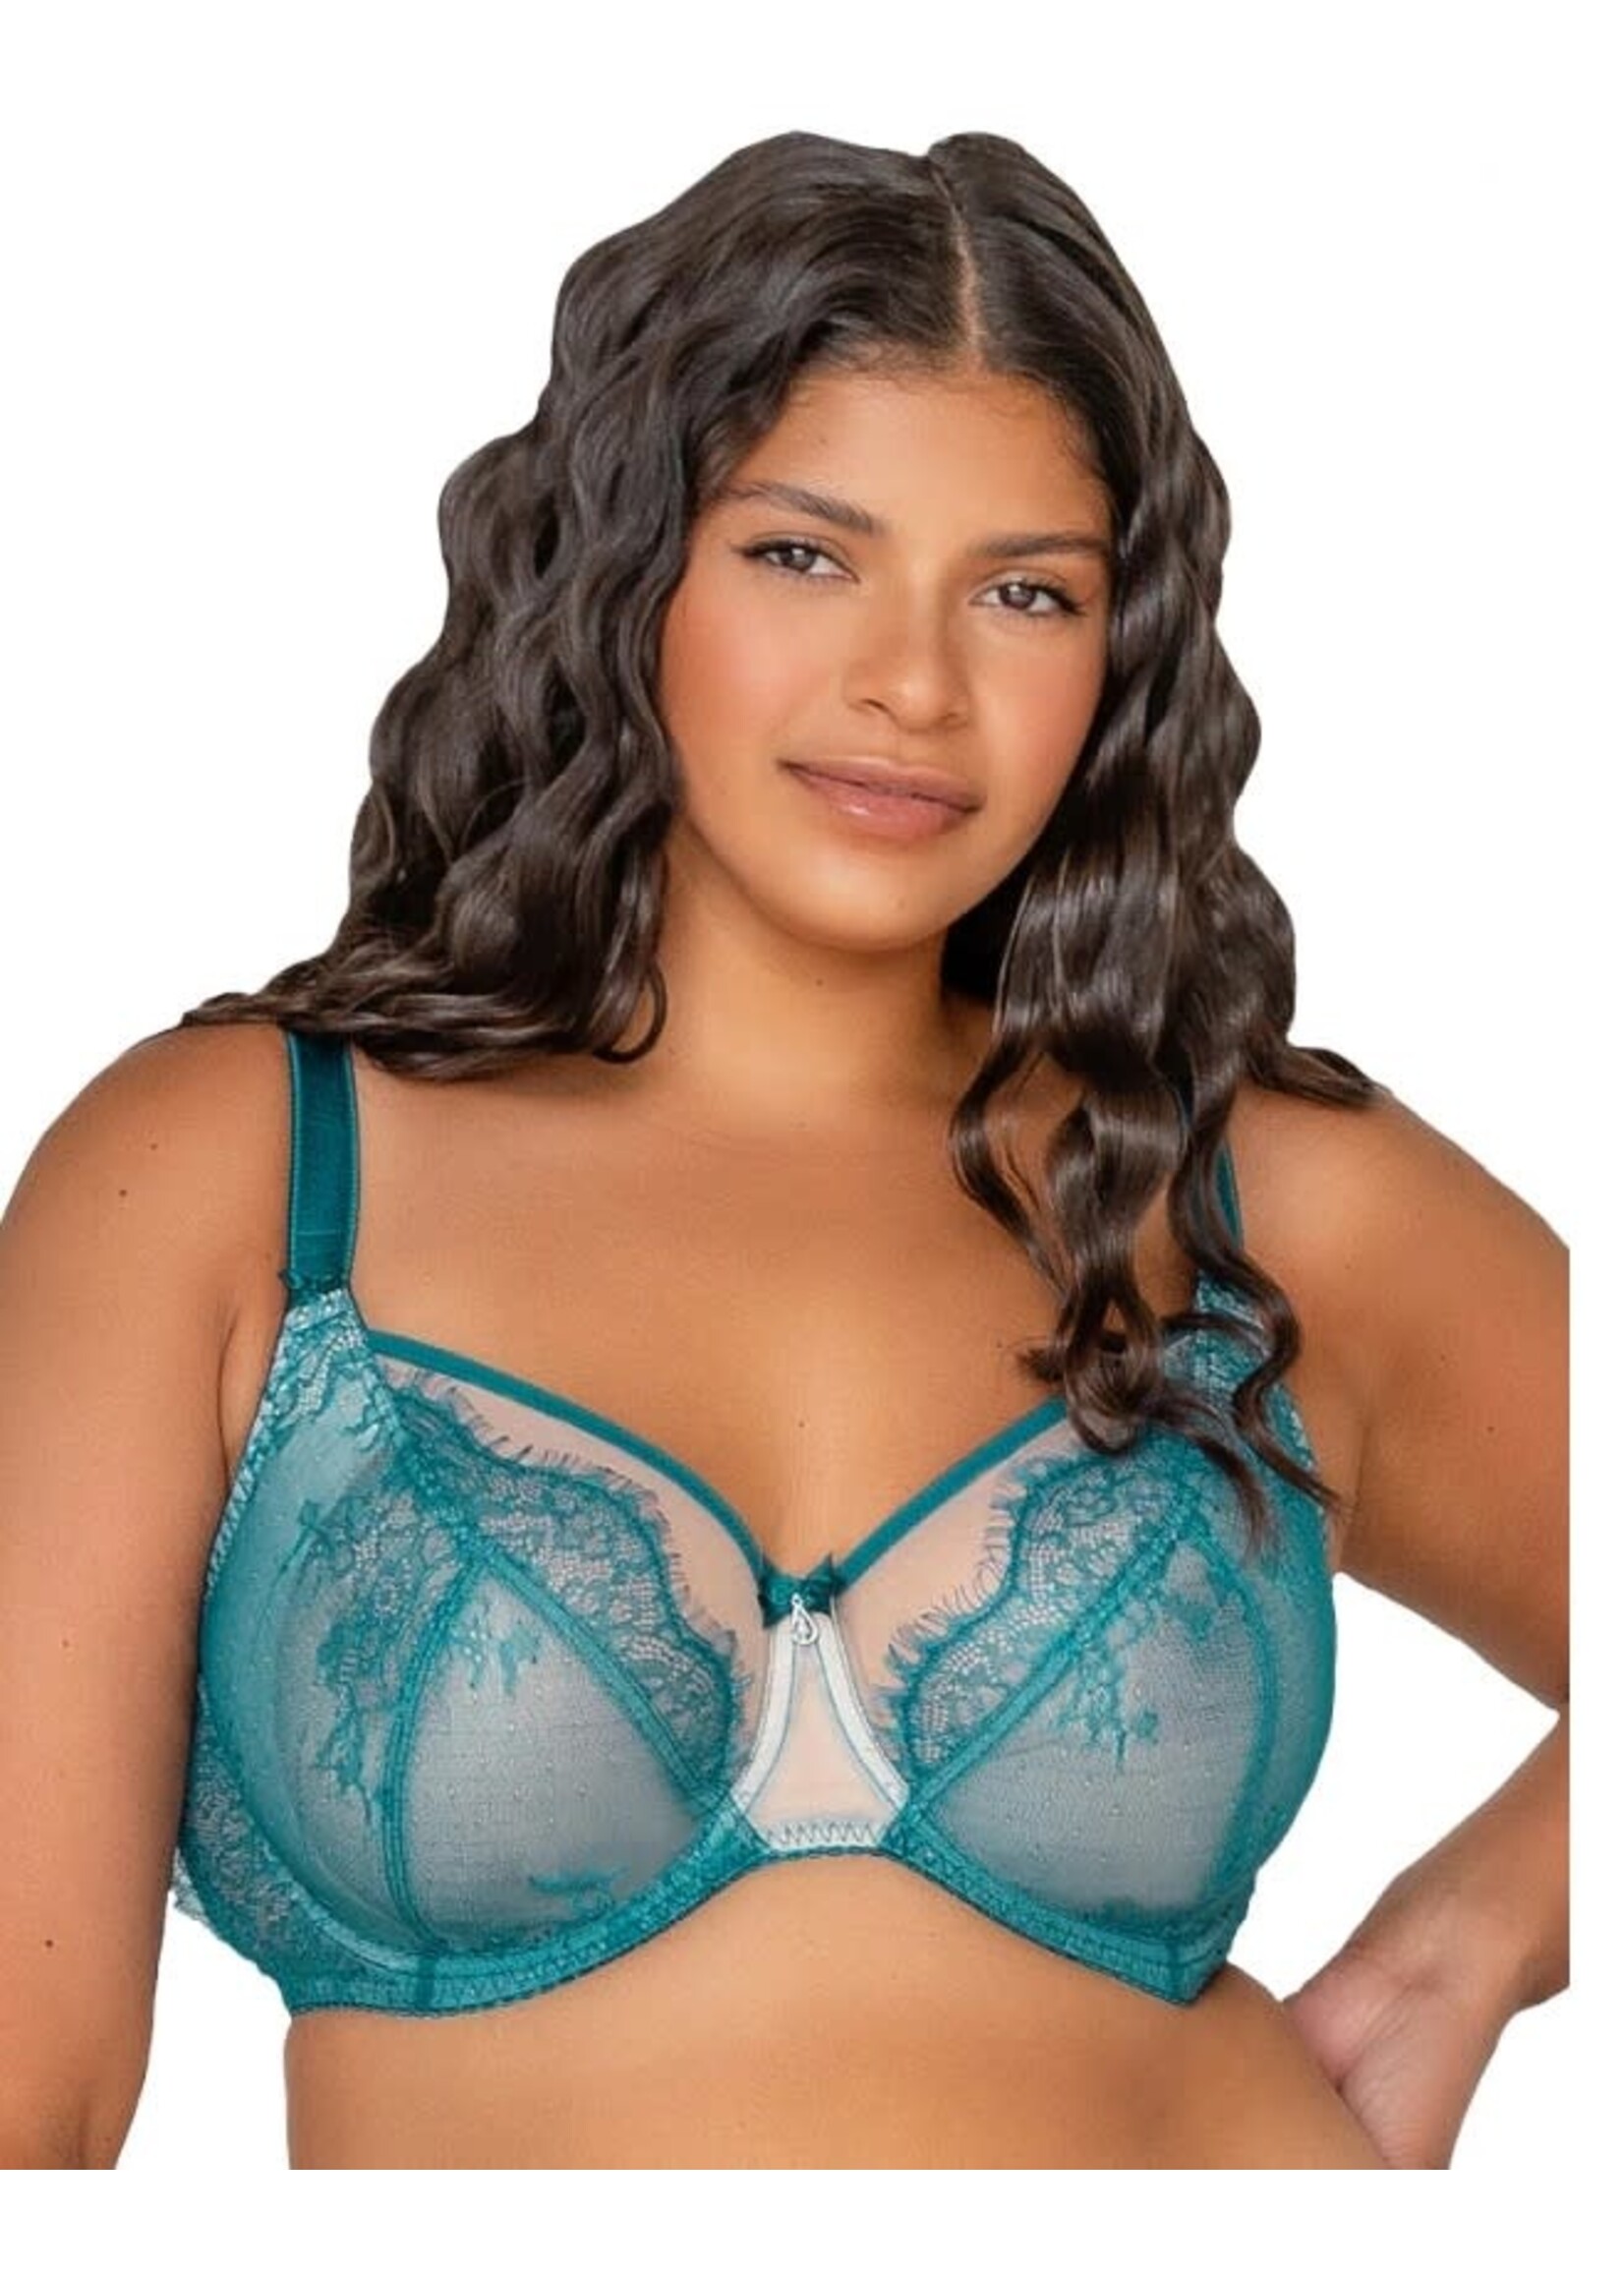 Underwire See-Through Bra with Contrasting Edges